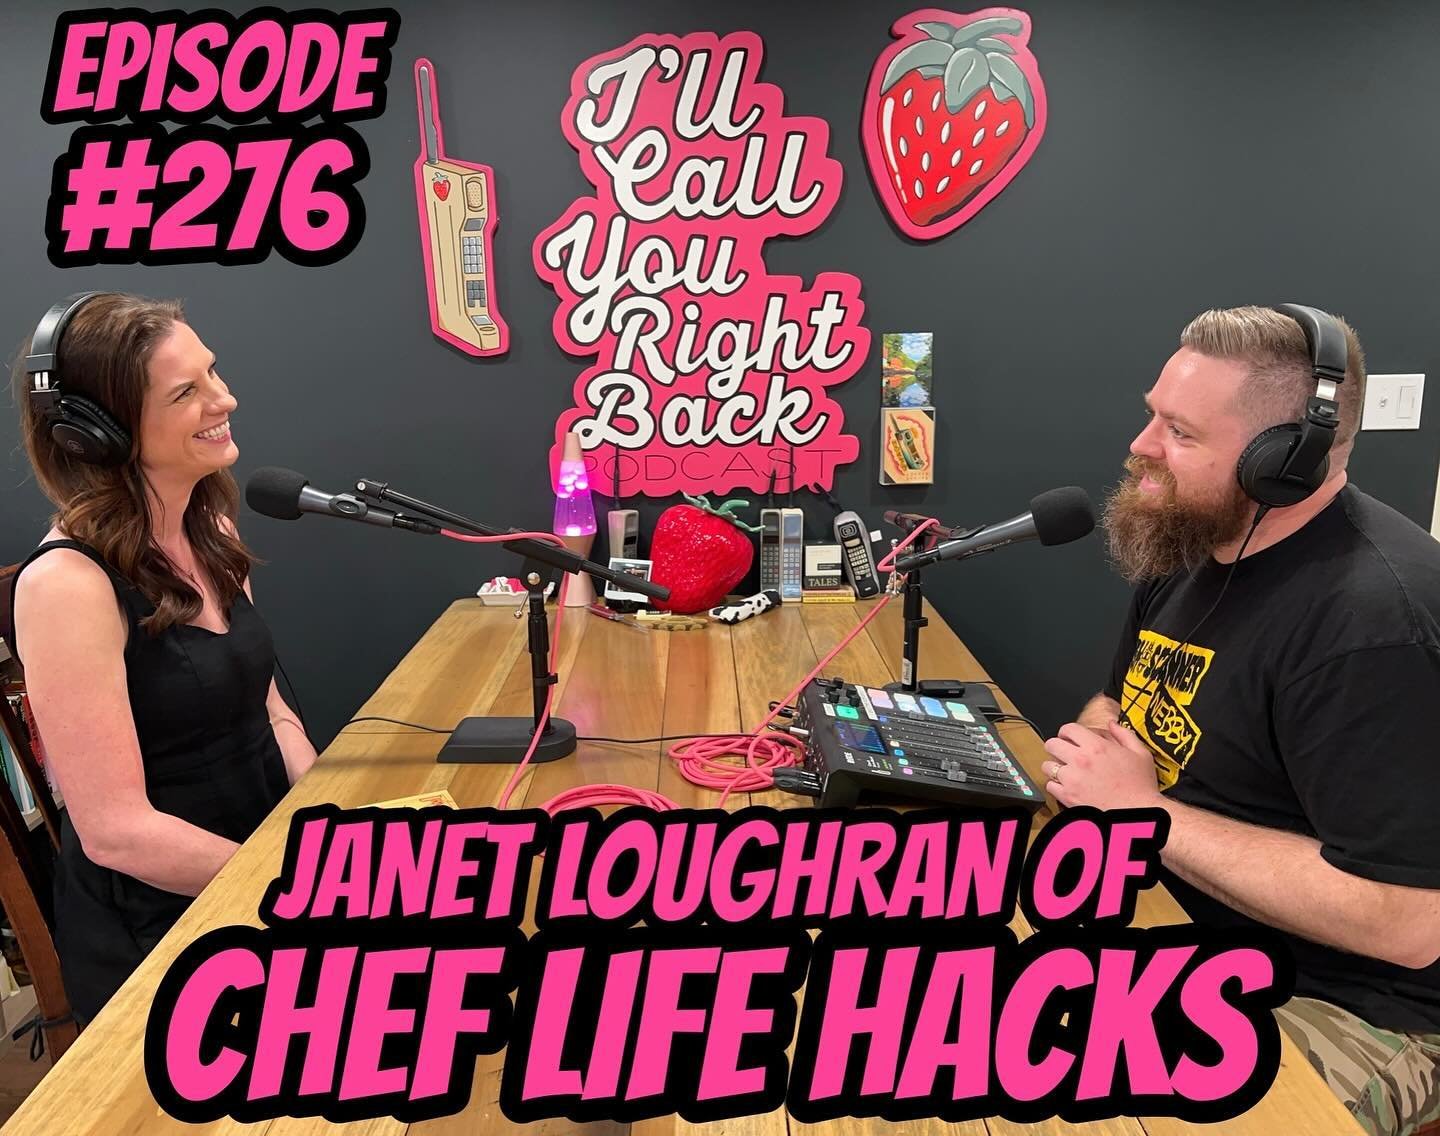 This week, we&rsquo;re back in the kitchen with @chef.life.hacks! Janet Loughran is a wife, mom, chef, content creator, and more. You&rsquo;ve probably seen her pop up on your Instagram and TikTok, teaching you some tricks of the trade or how to make